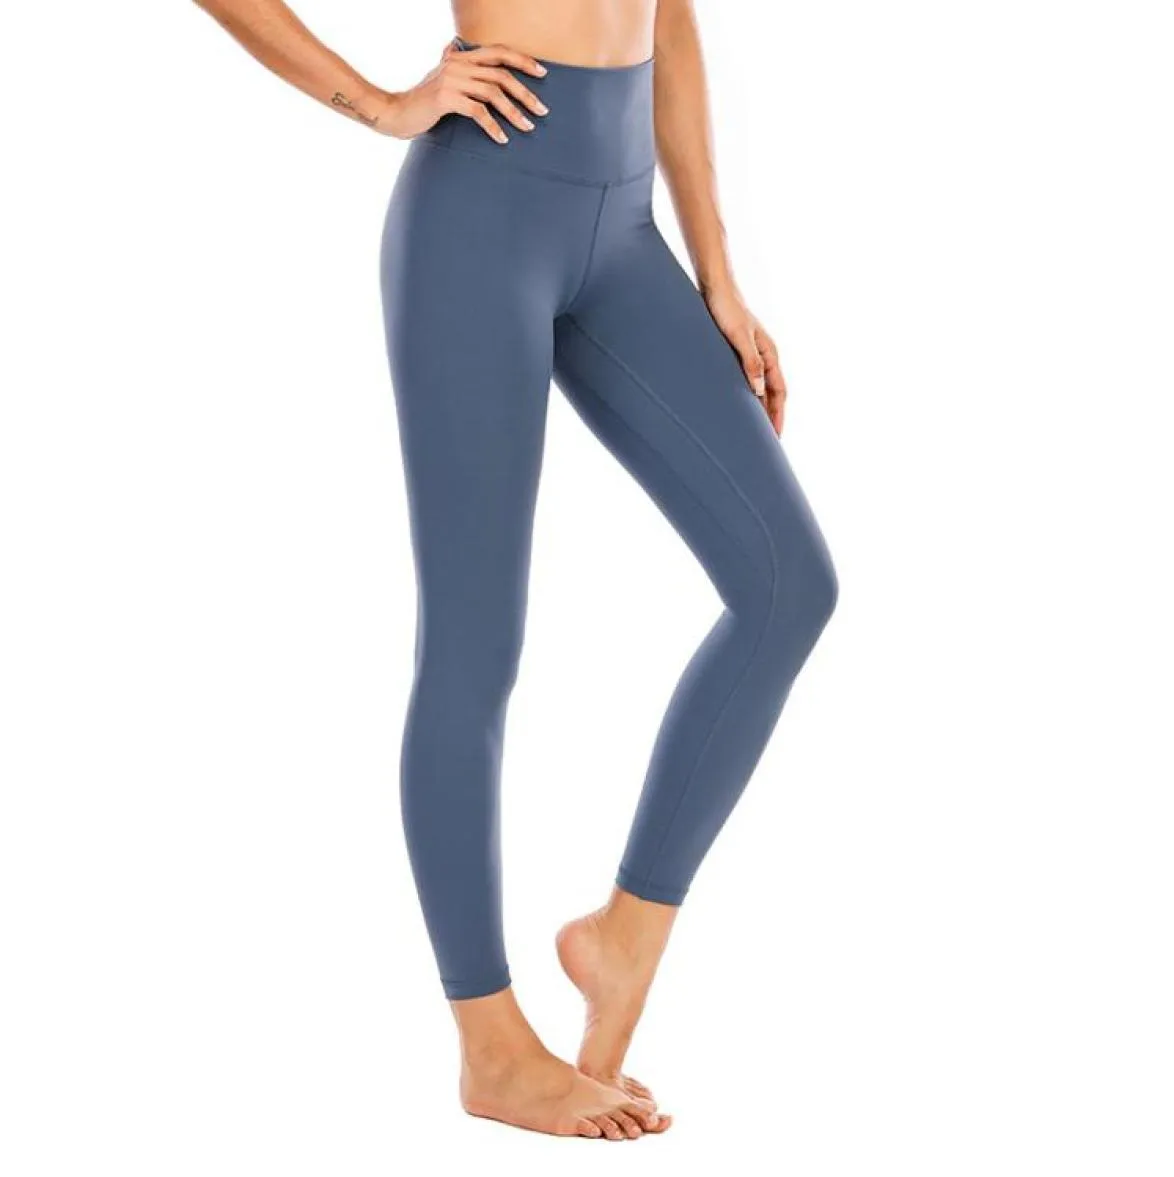 High Waist Solid Color Double Face Sanding Skin Nude Yoga Pants Gym Clothes Women Running Fitness Workout Women Leggings Tights8707914